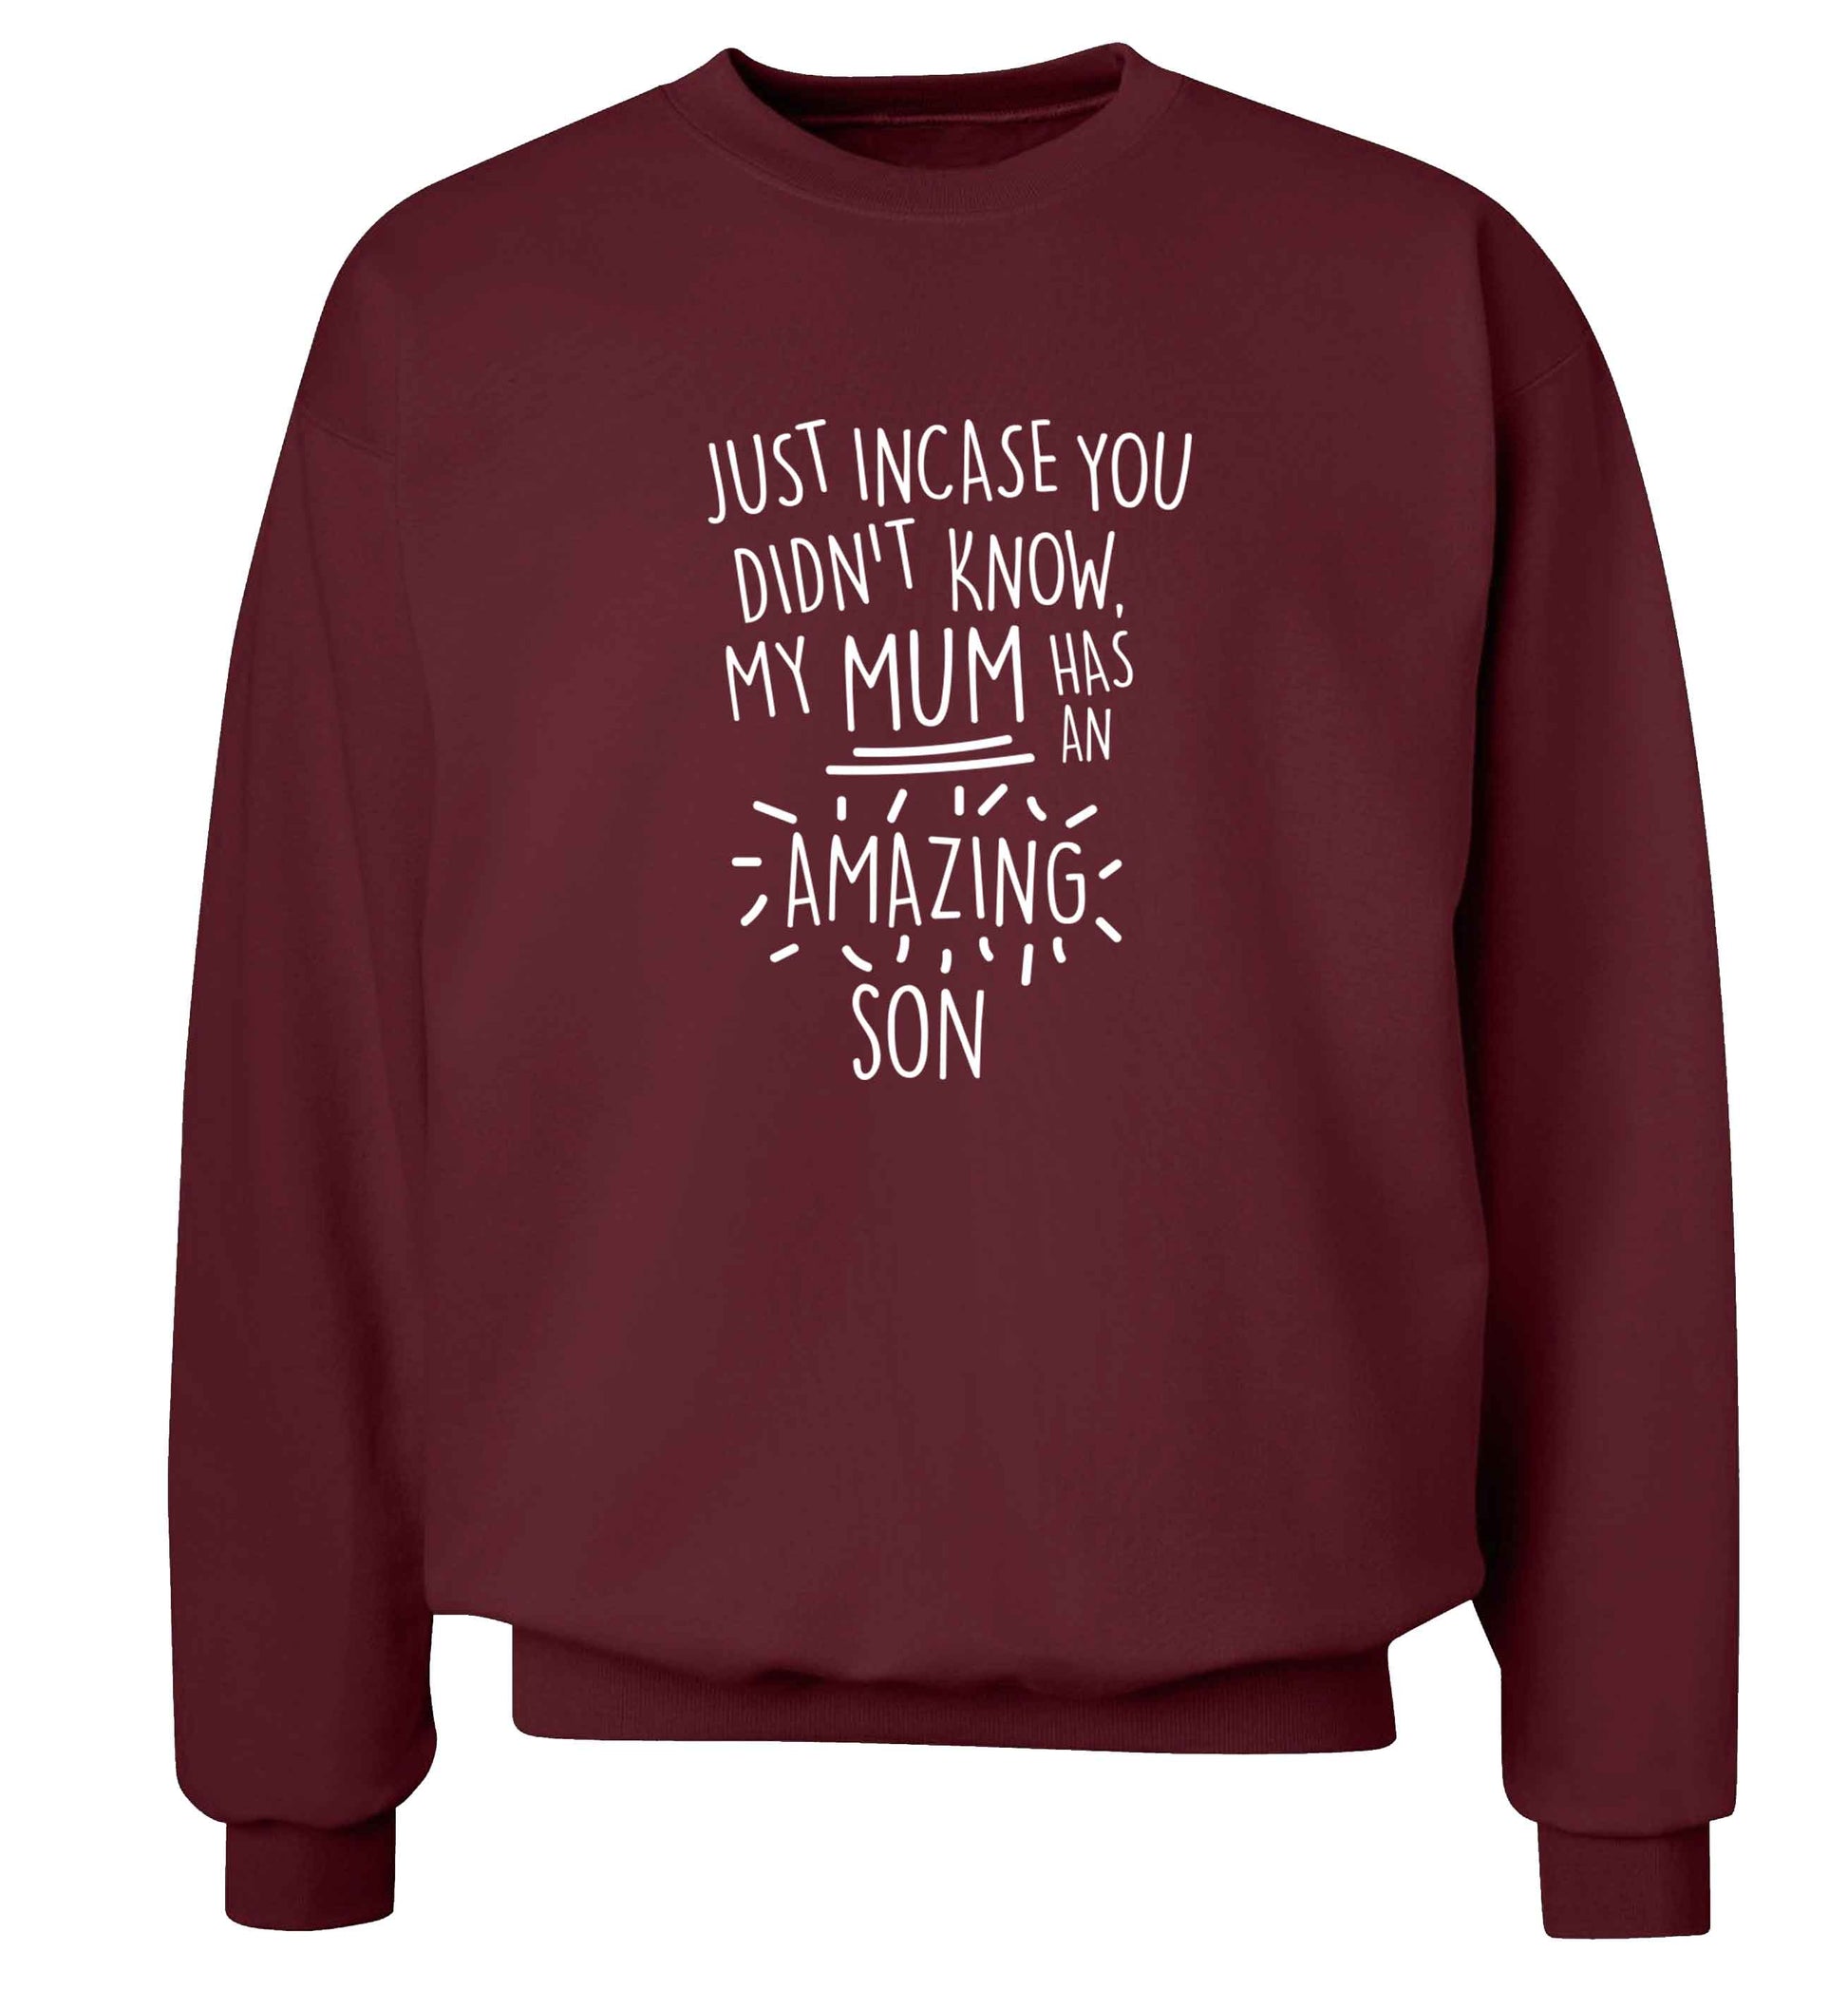 Just incase you didn't know my mum has an amazing son adult's unisex maroon sweater 2XL